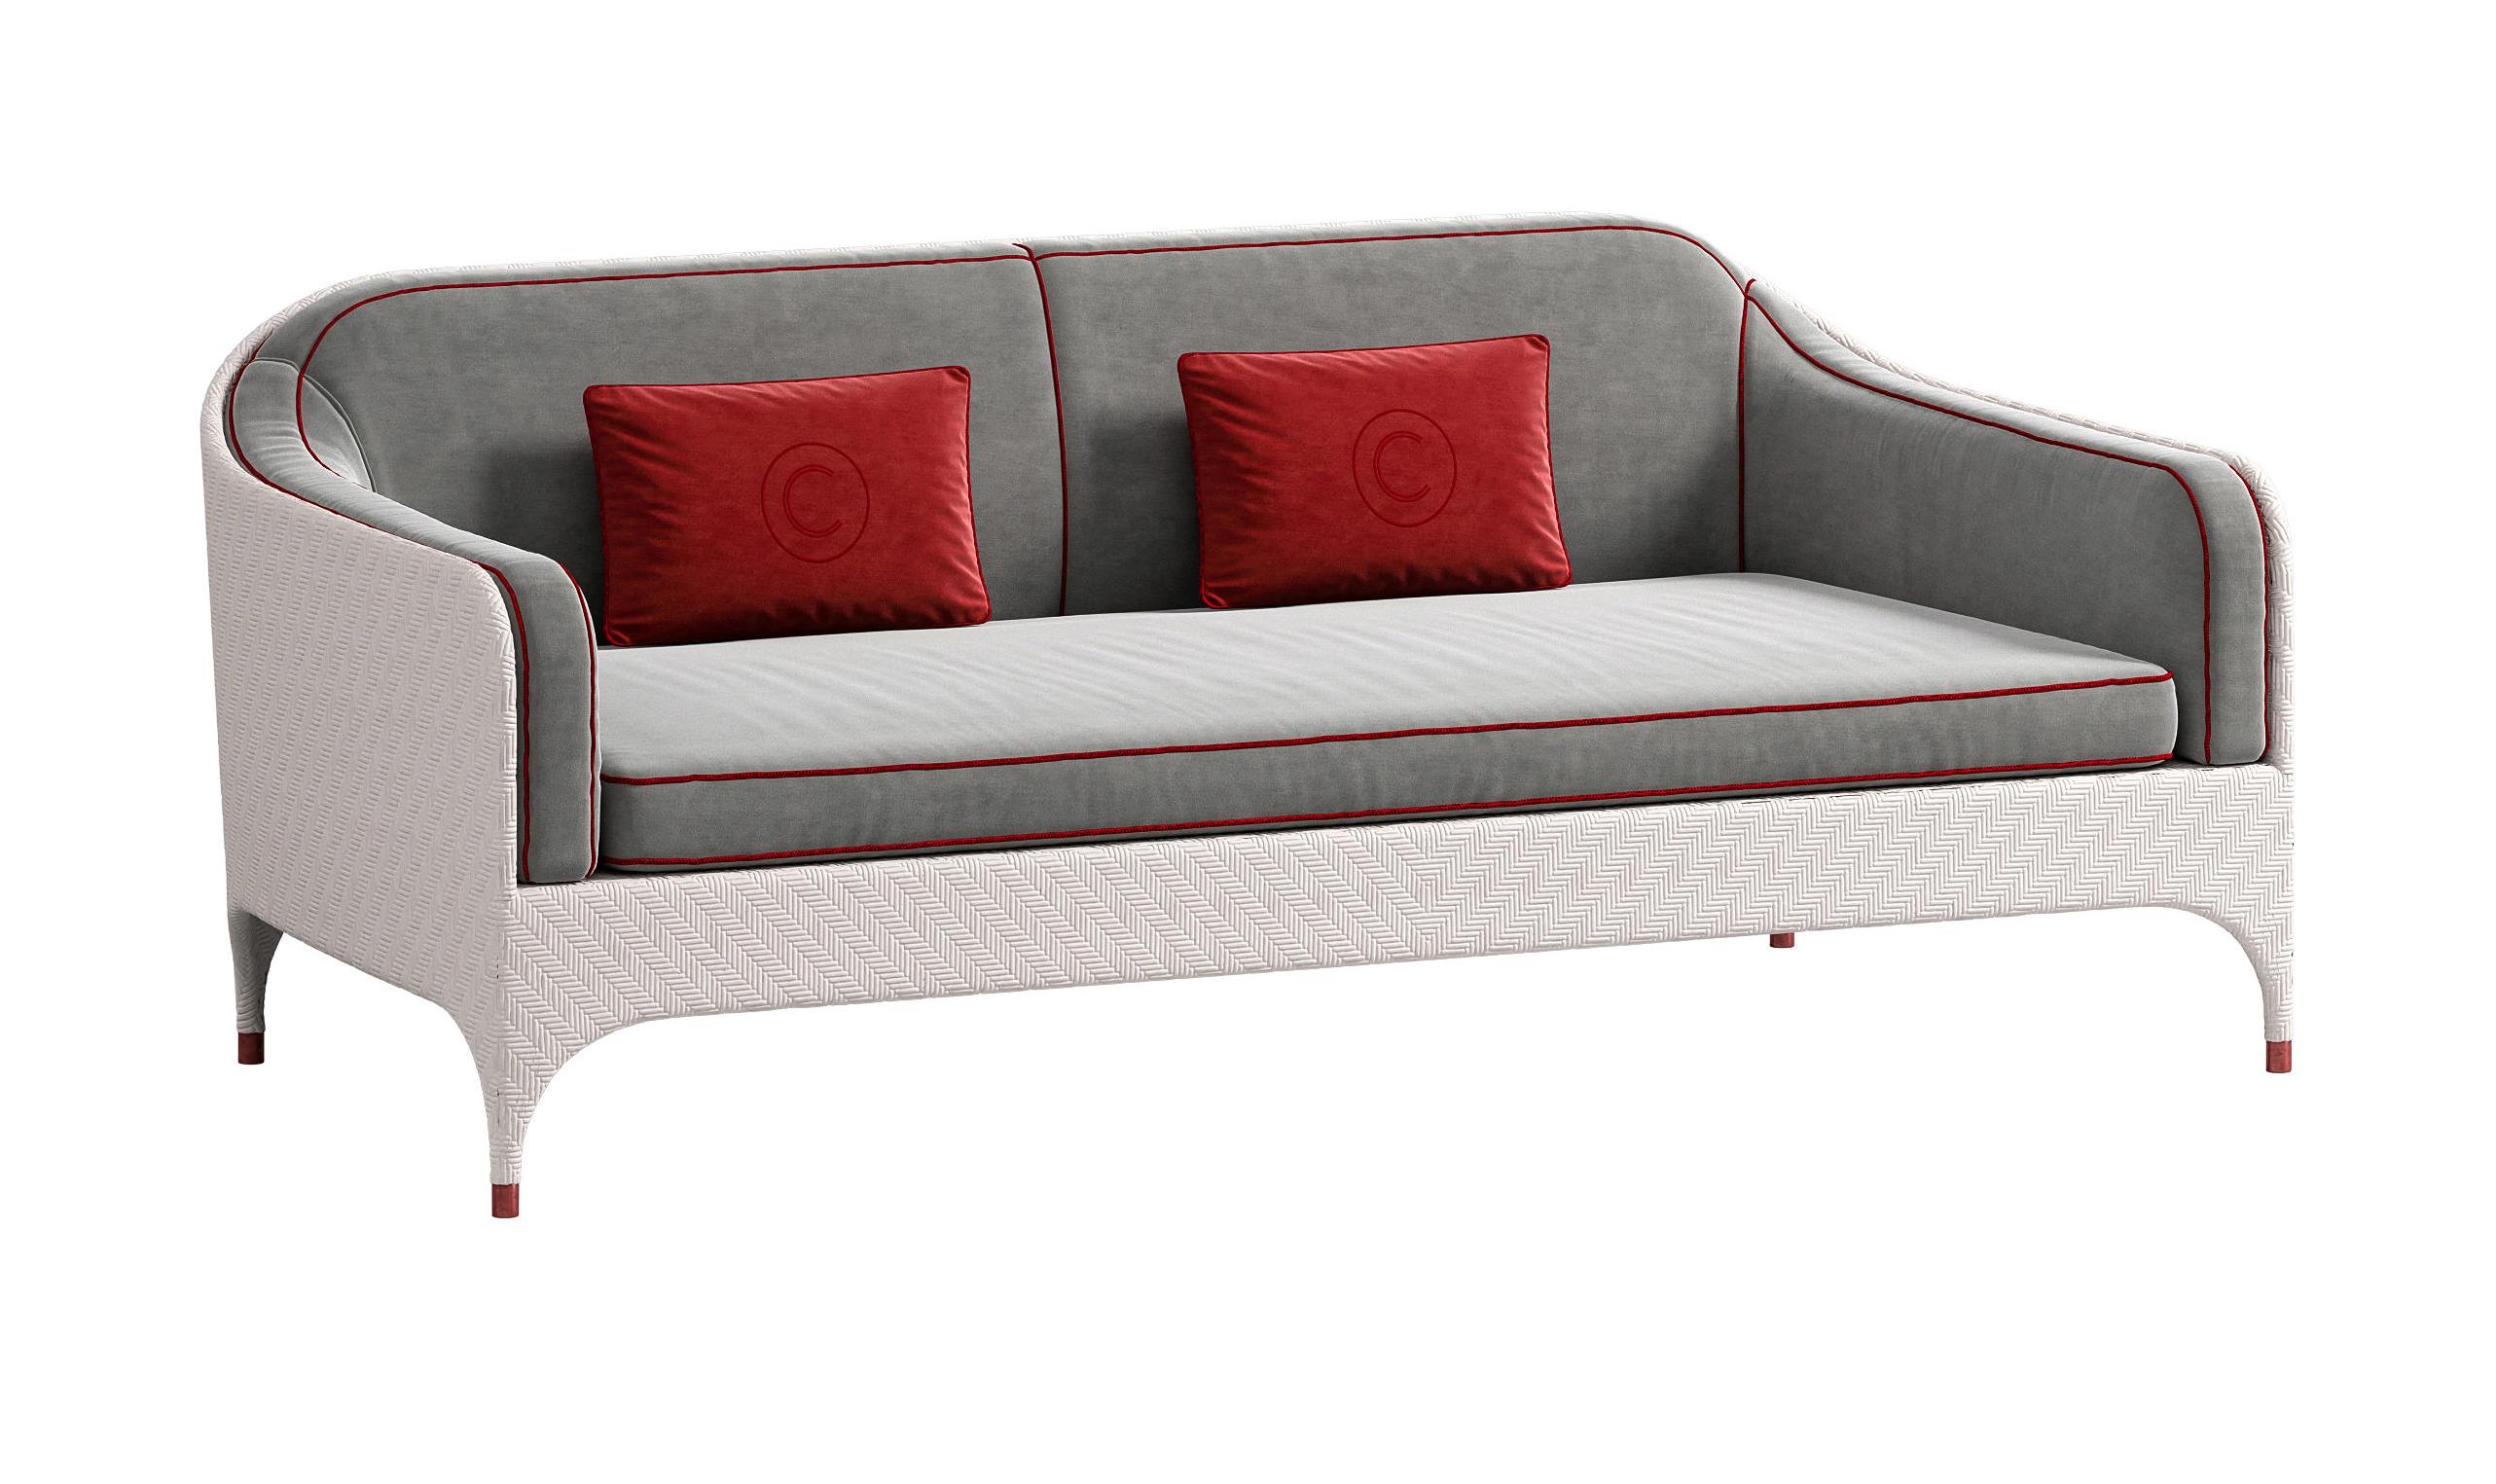 Two-Seater Italian Outdoor Sofa With Armrests